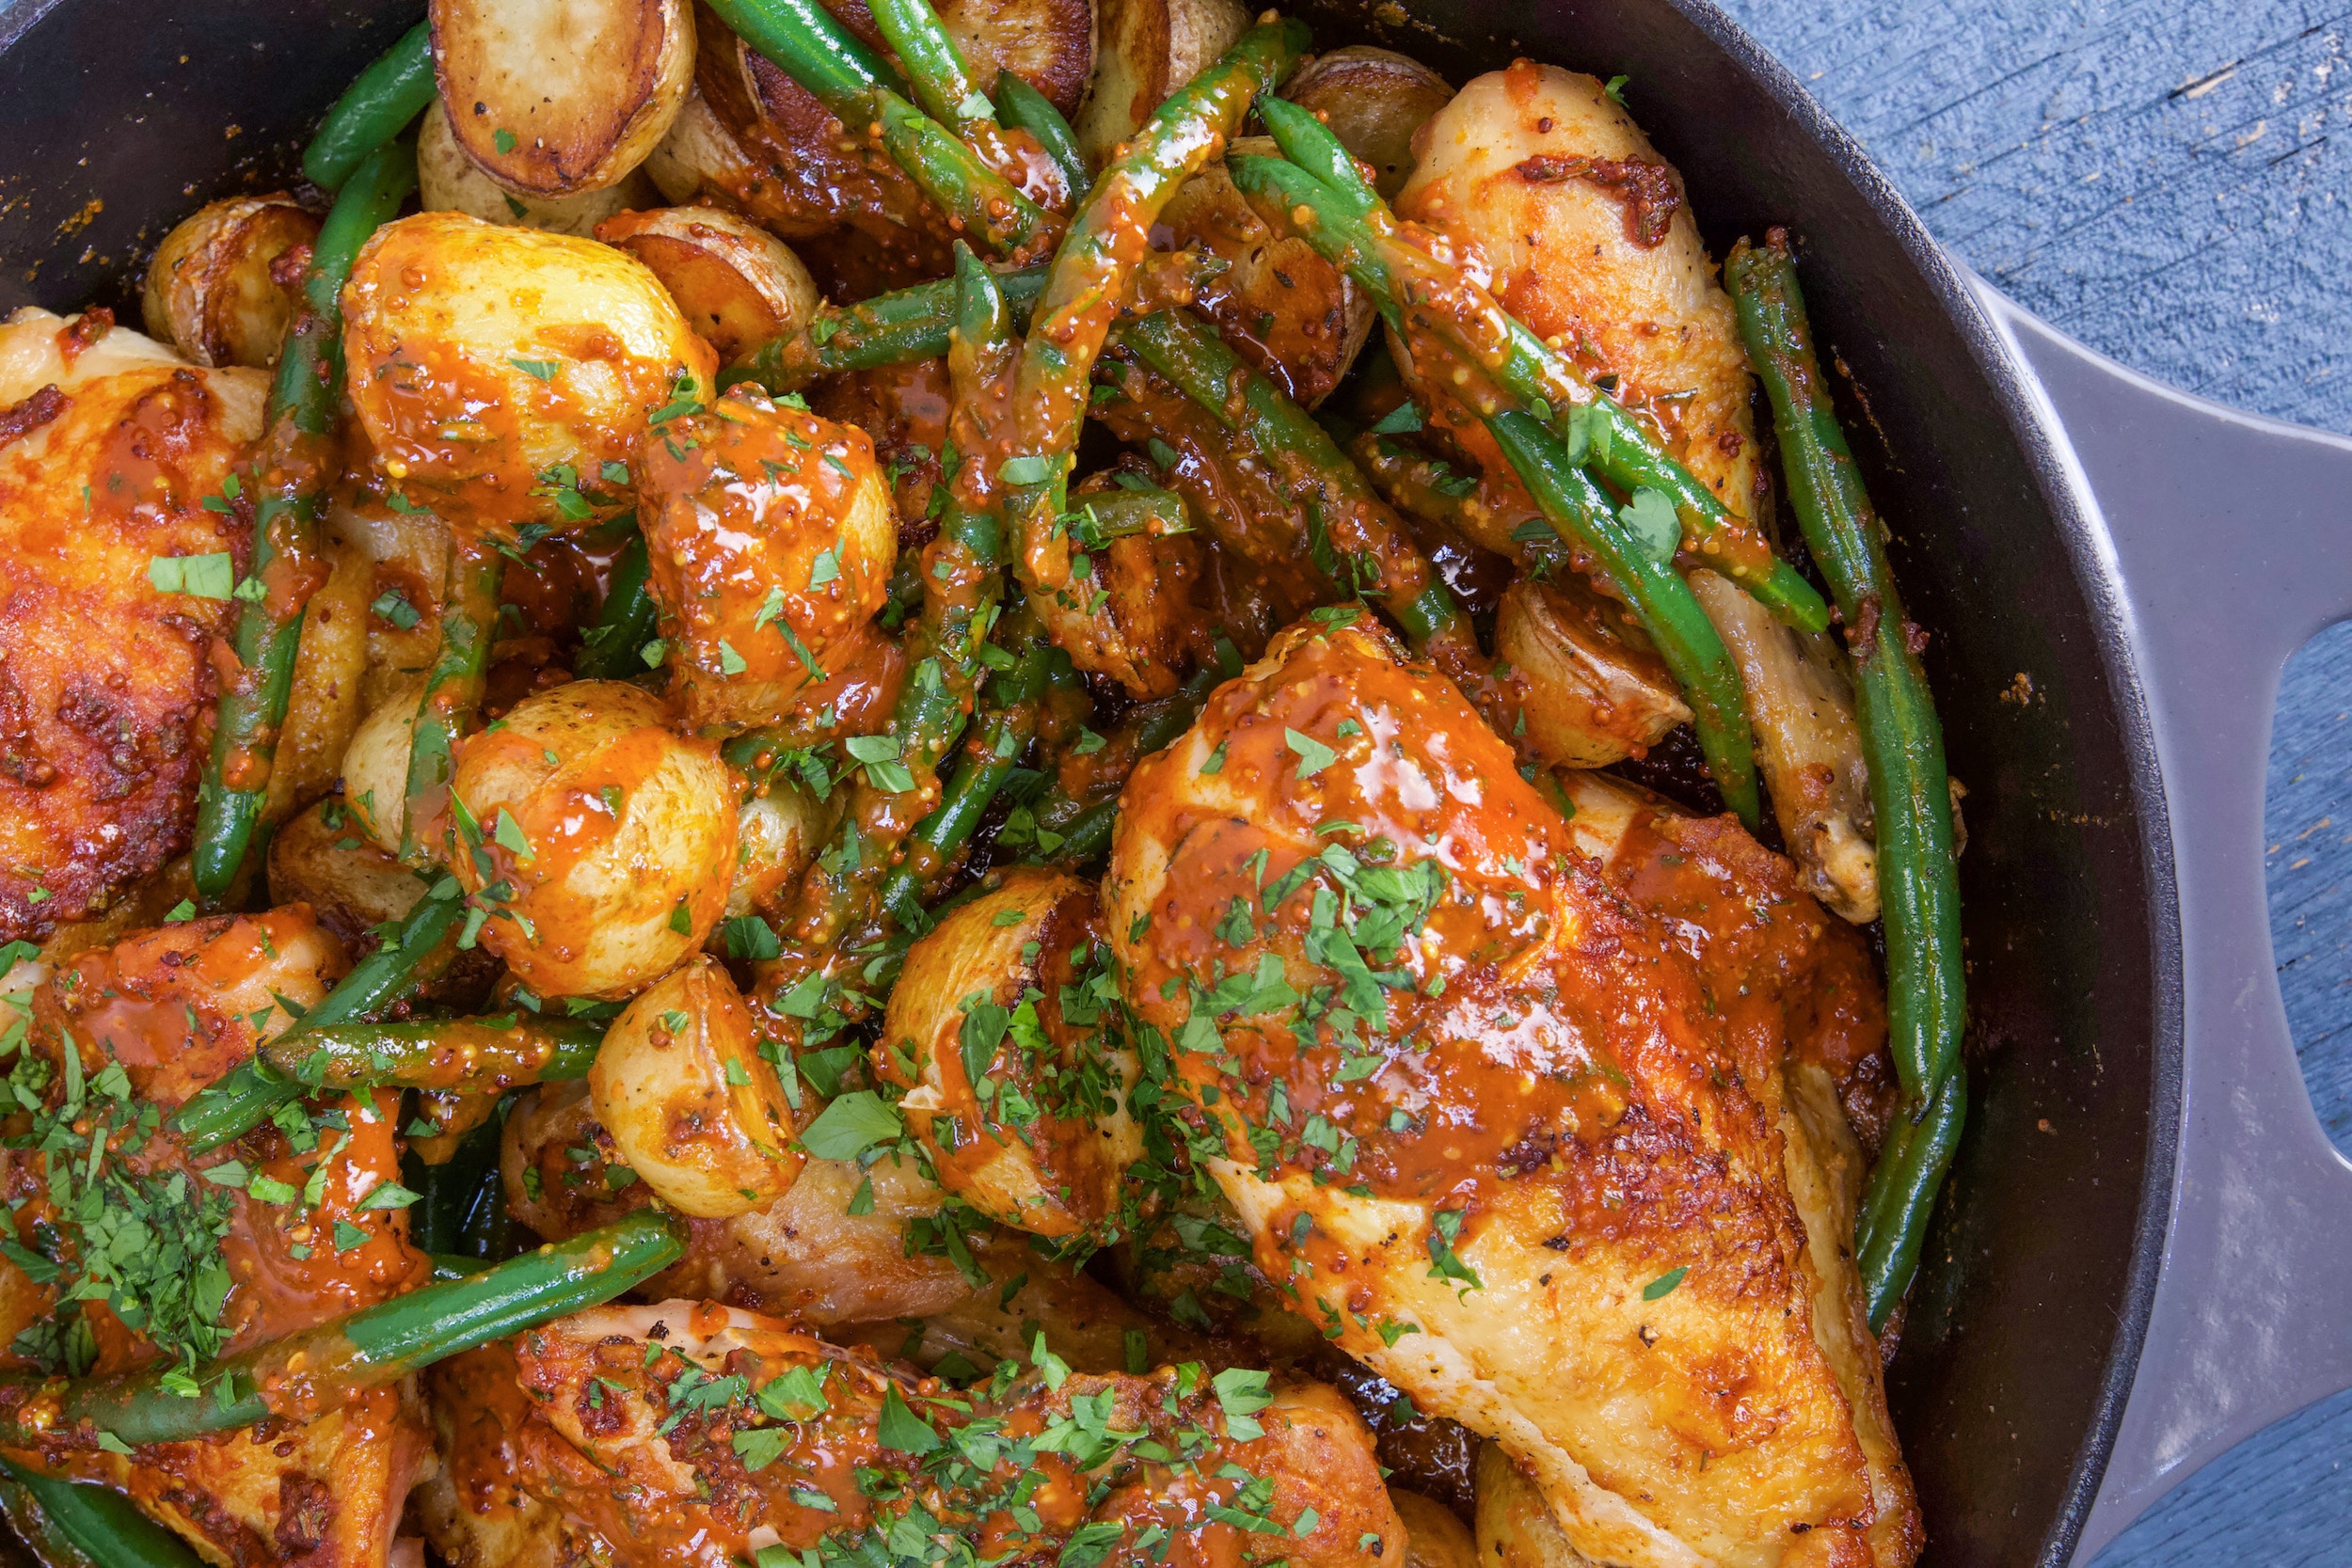 Rachael's Spicy Honey Mustard Chicken with Potatoes and Green Beans